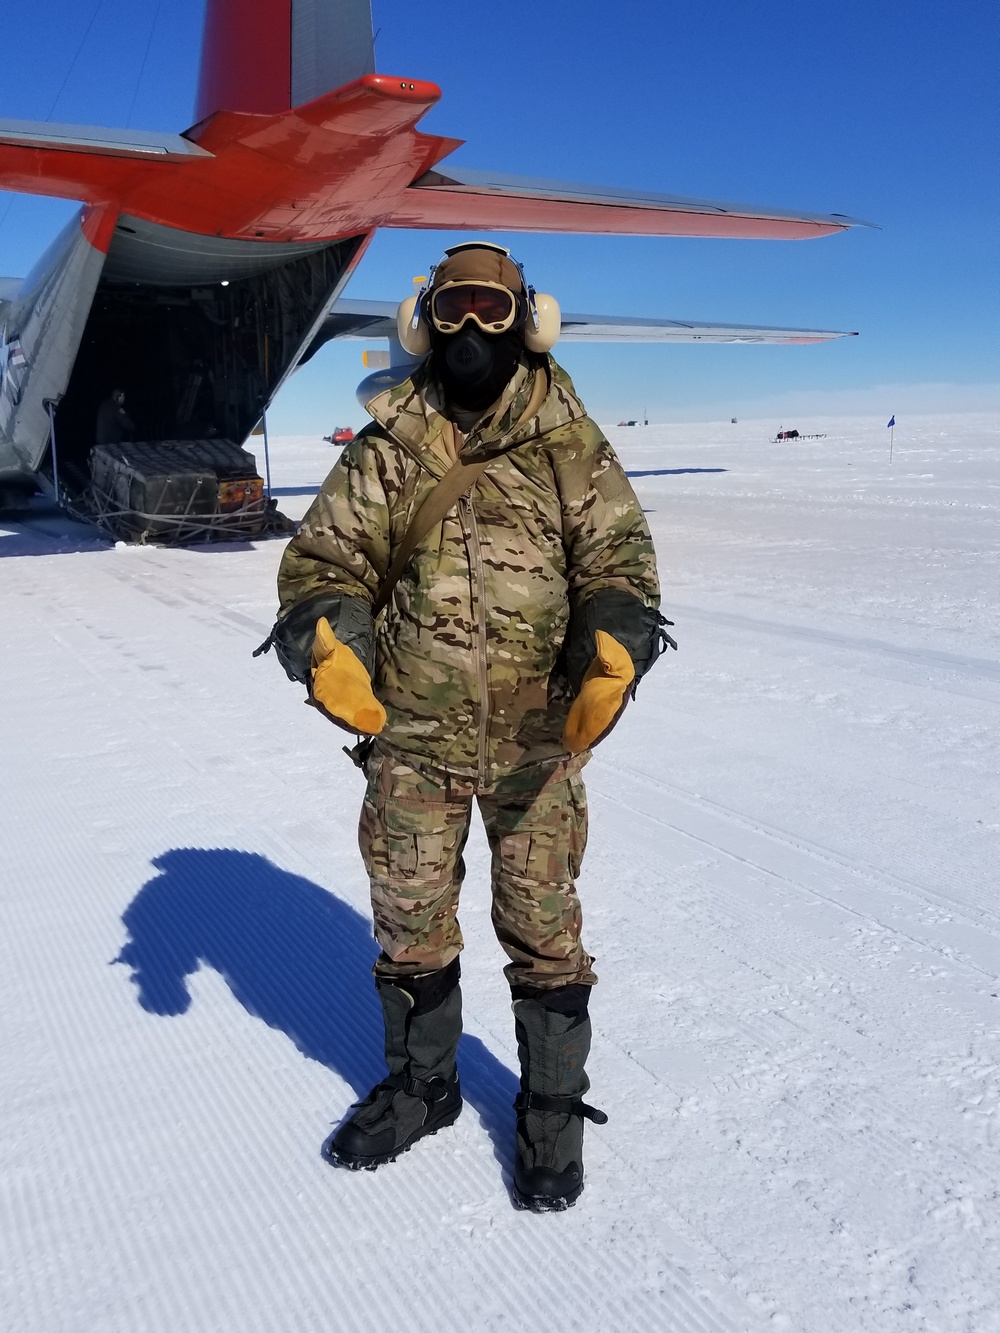 Wings join up for Polar training